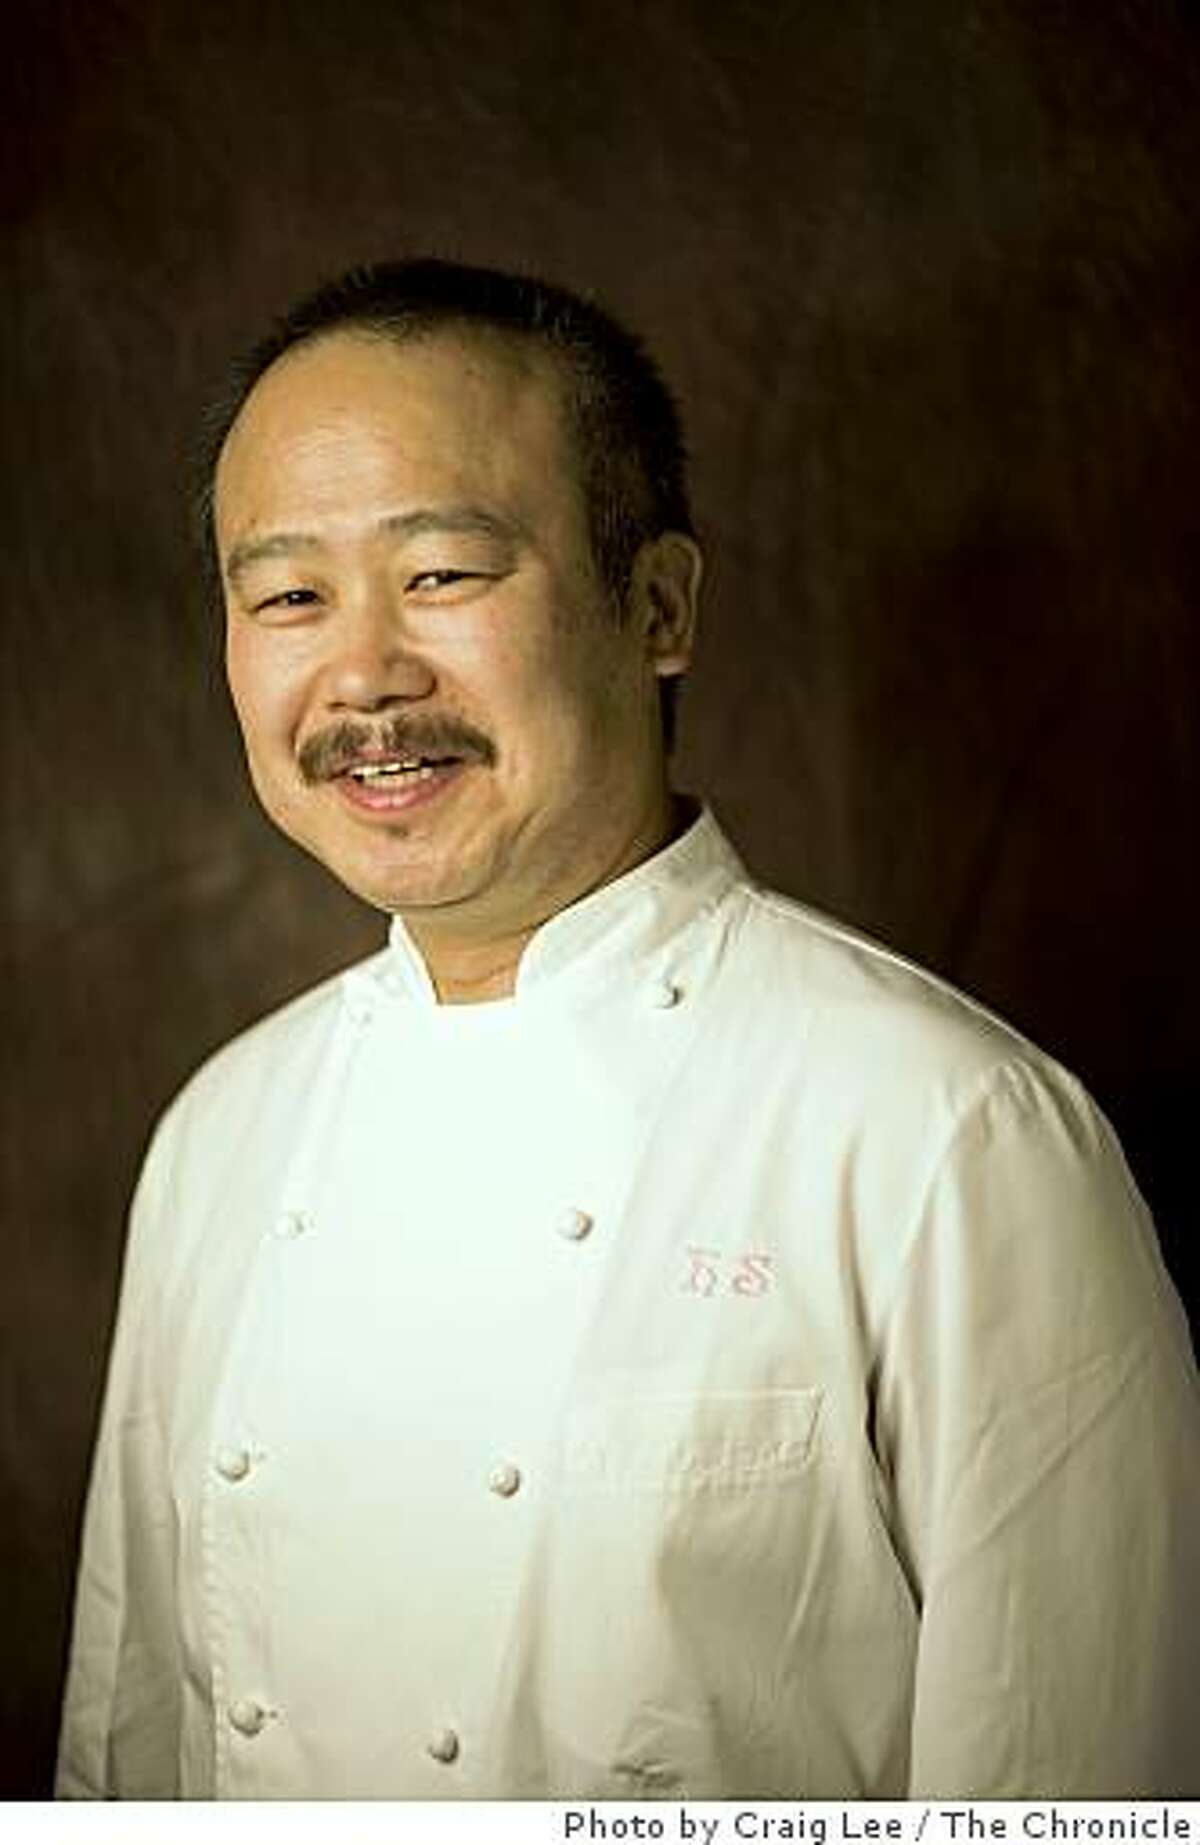 Hiro Sone, chef at Terra in St. Helena and Ame in San Francisco, Calif., on July 10, 2008.Photo by Craig Lee / The Chronicle